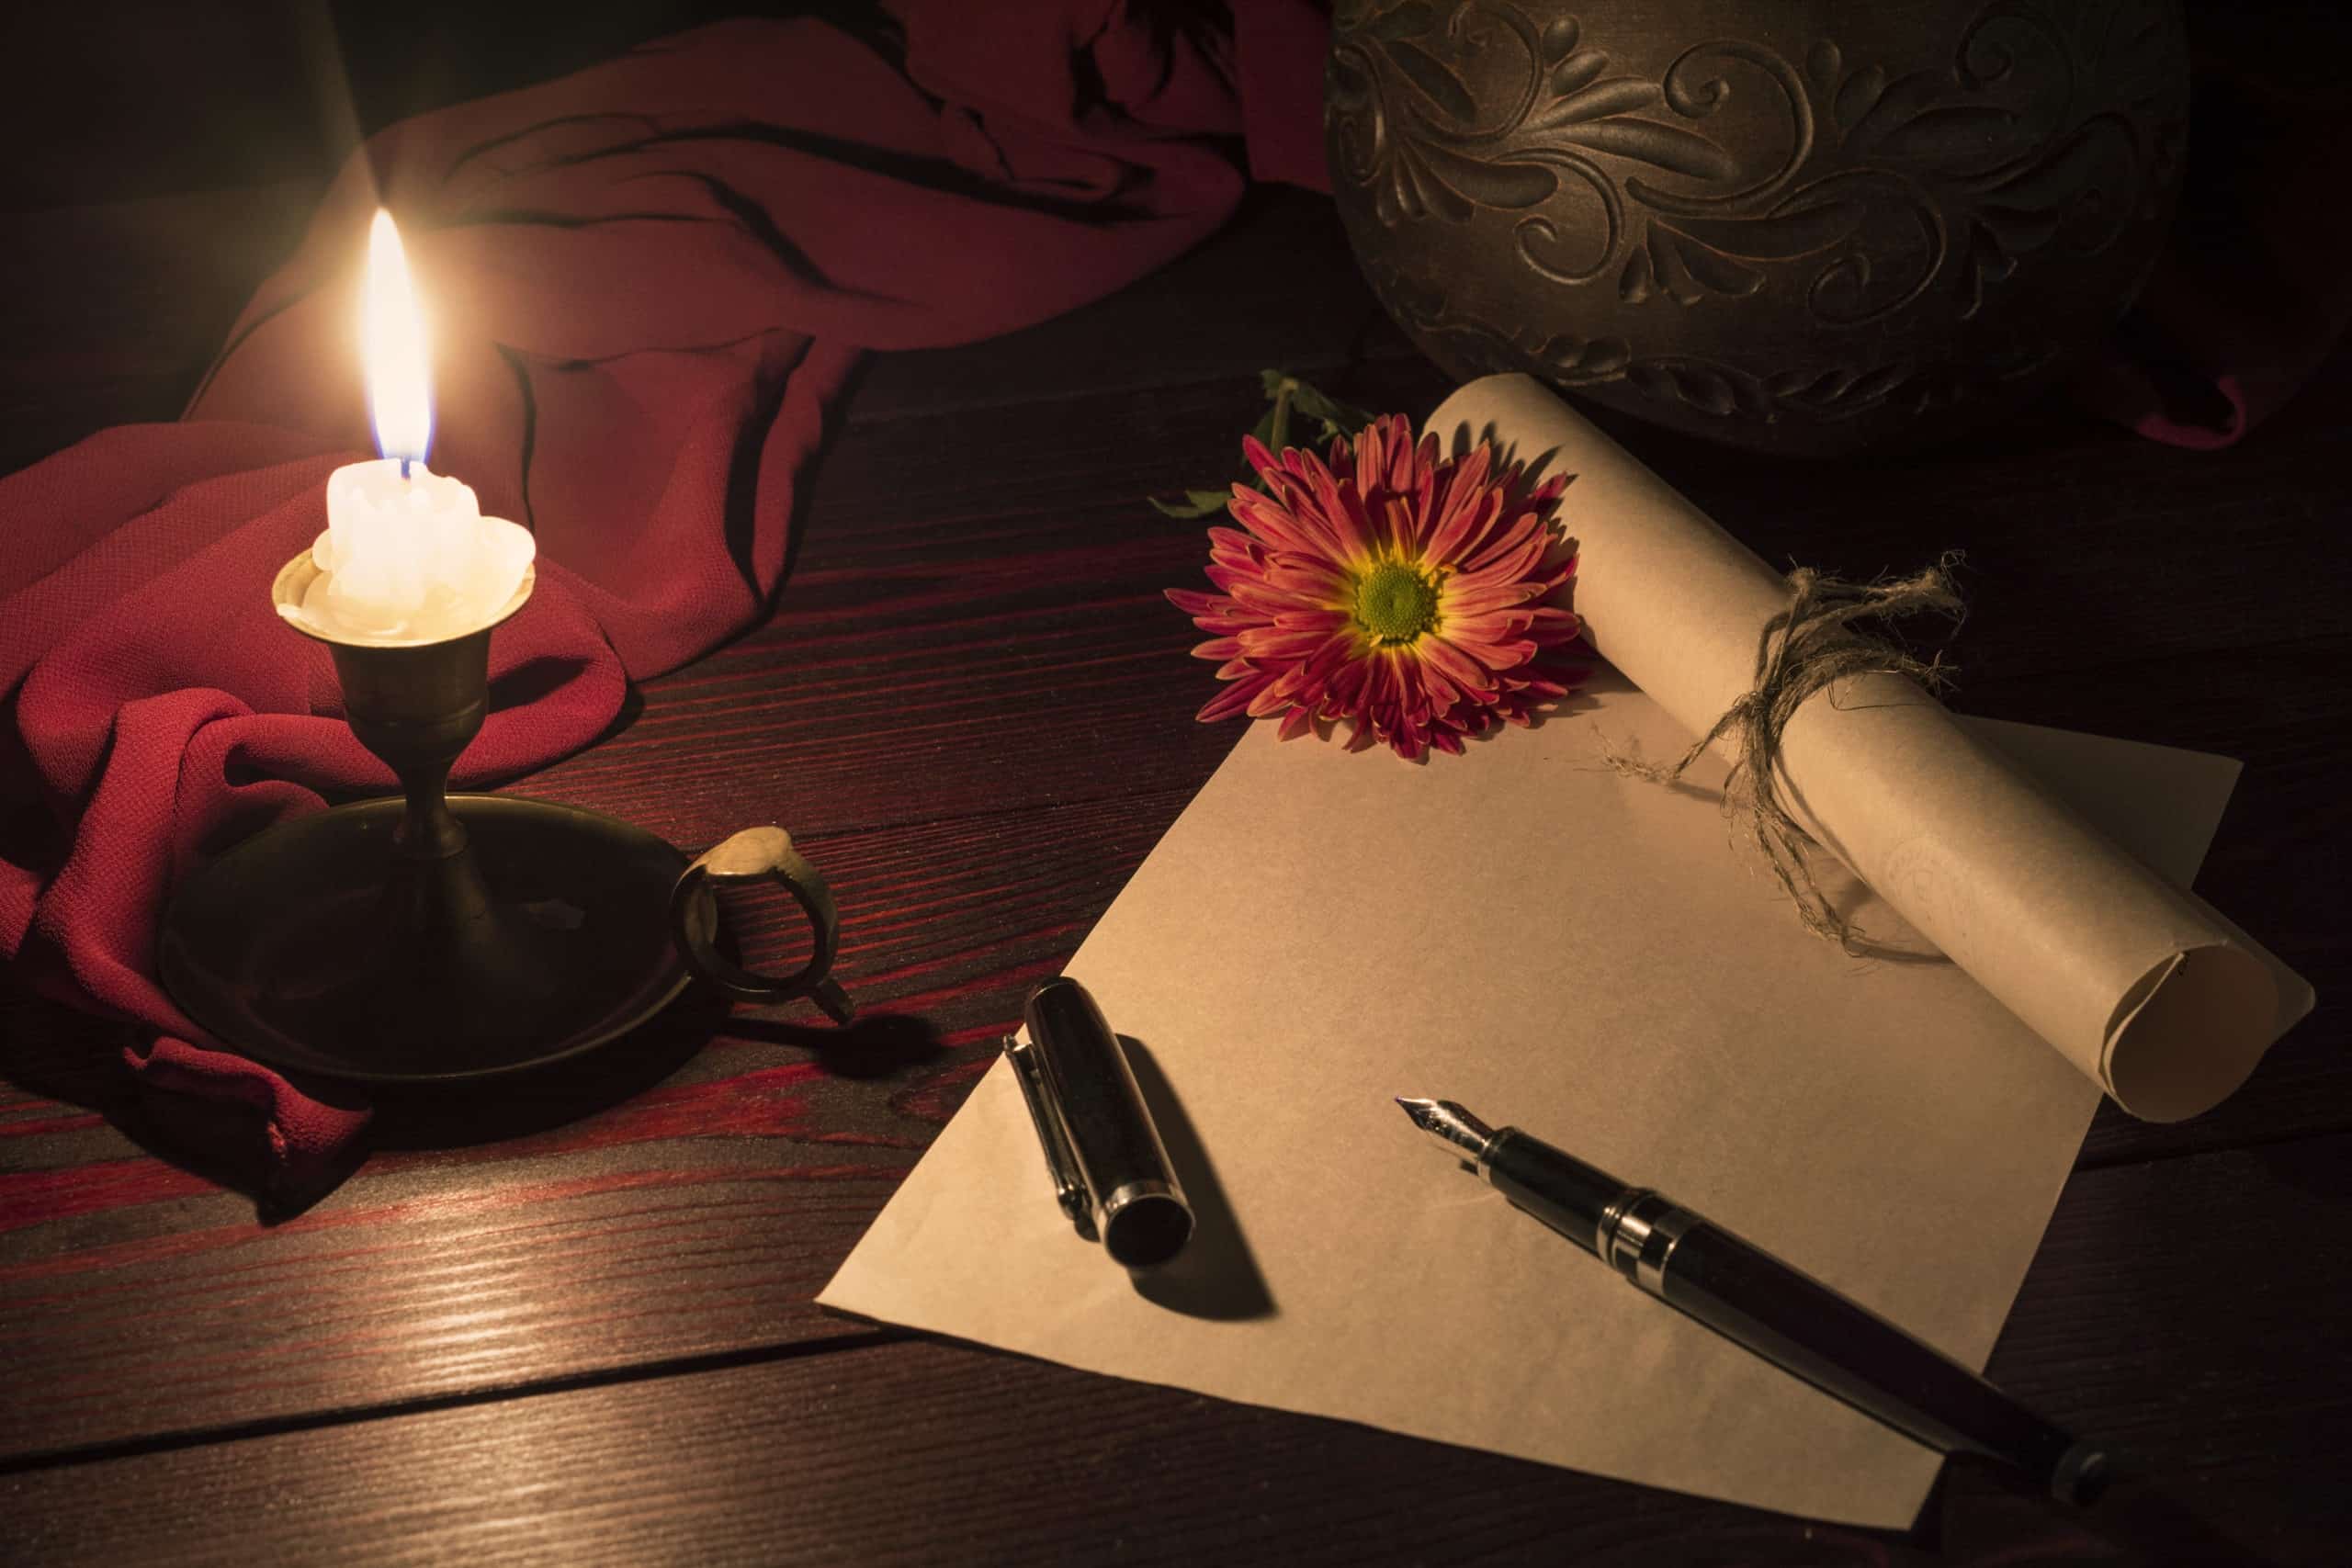 The candle illuminates the desk with pen and paper